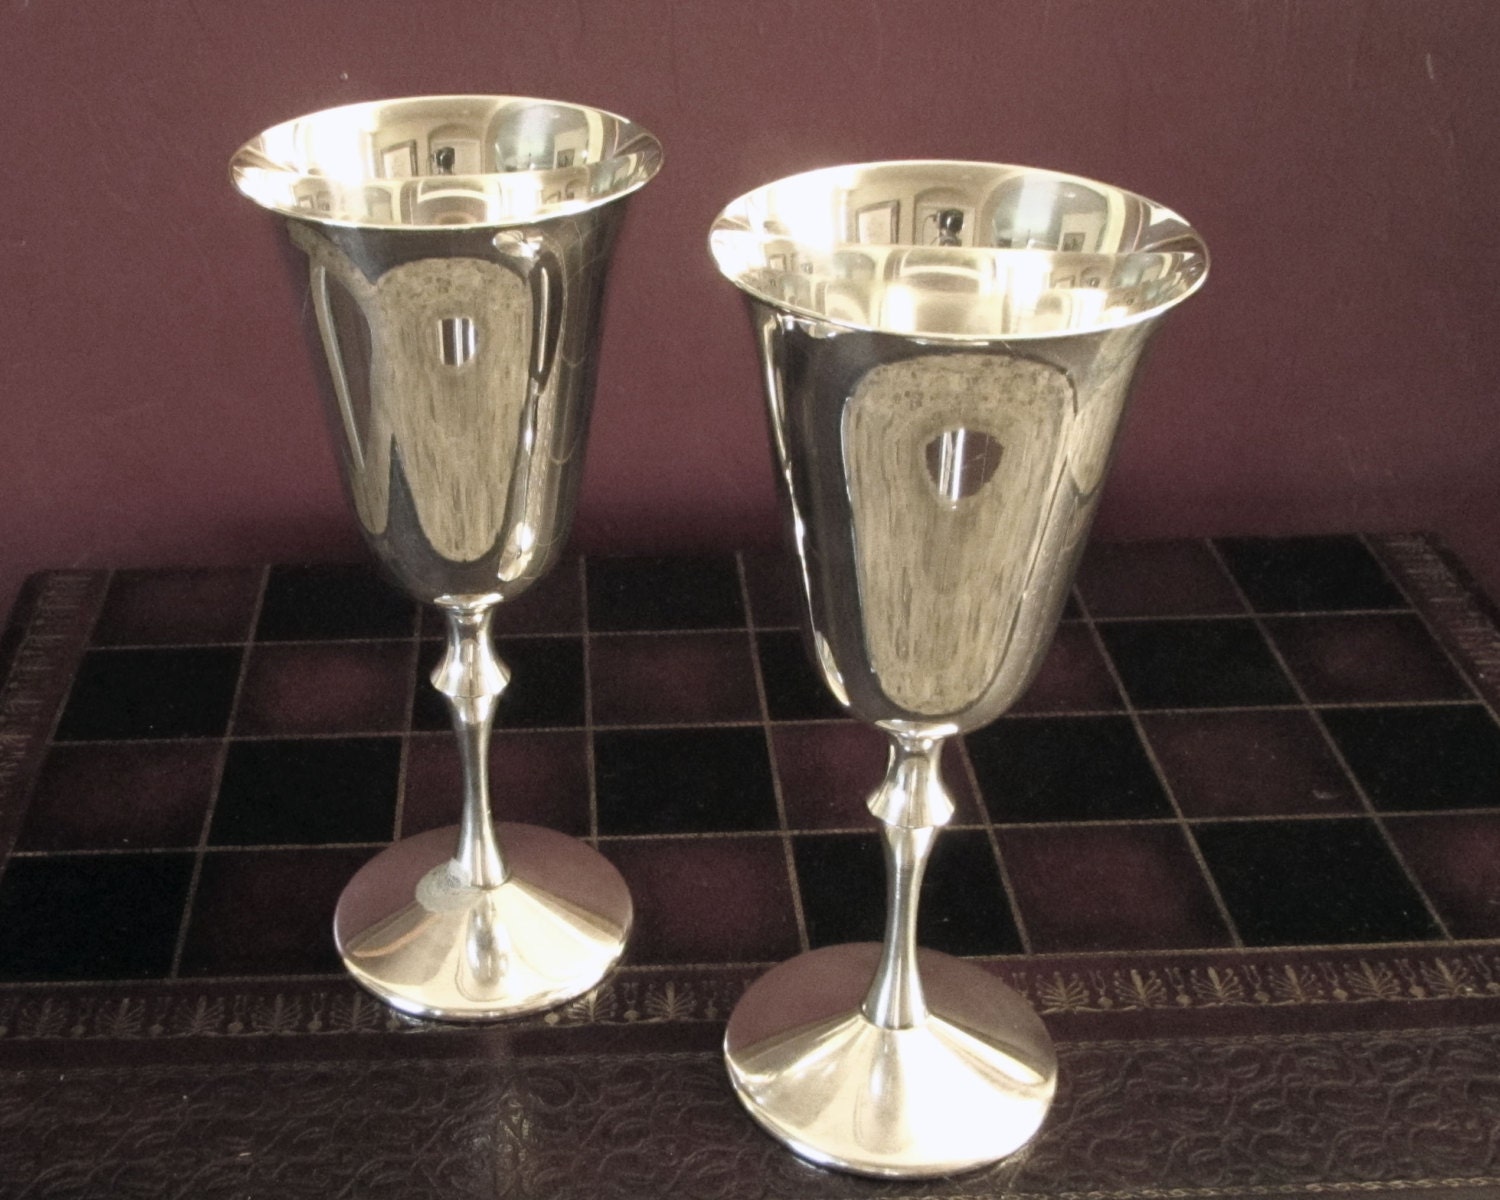 Kirk Silver Plate Wine Goblet Made in Spain Circa 1960